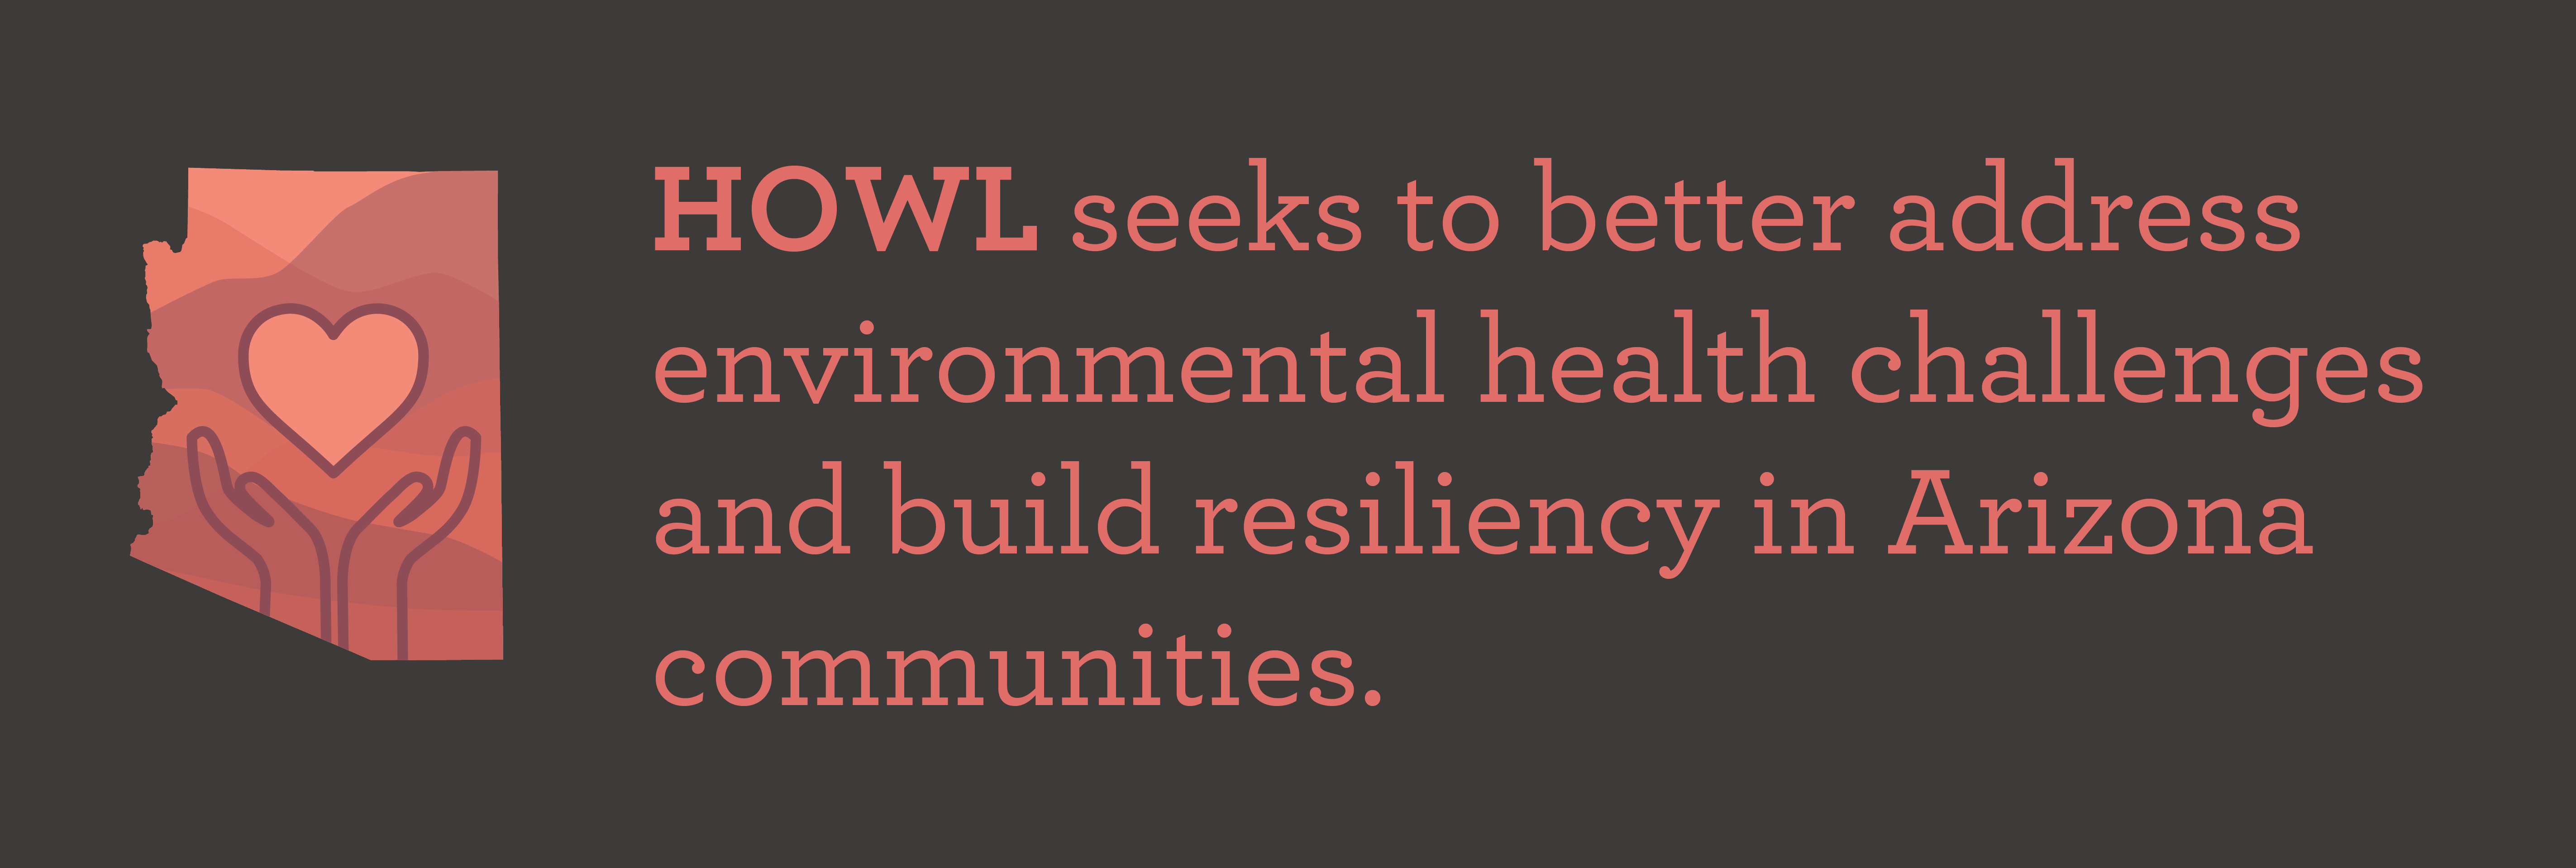 HOWL seeks to better address environmental health challenges and build resiliency in Arizona communities.